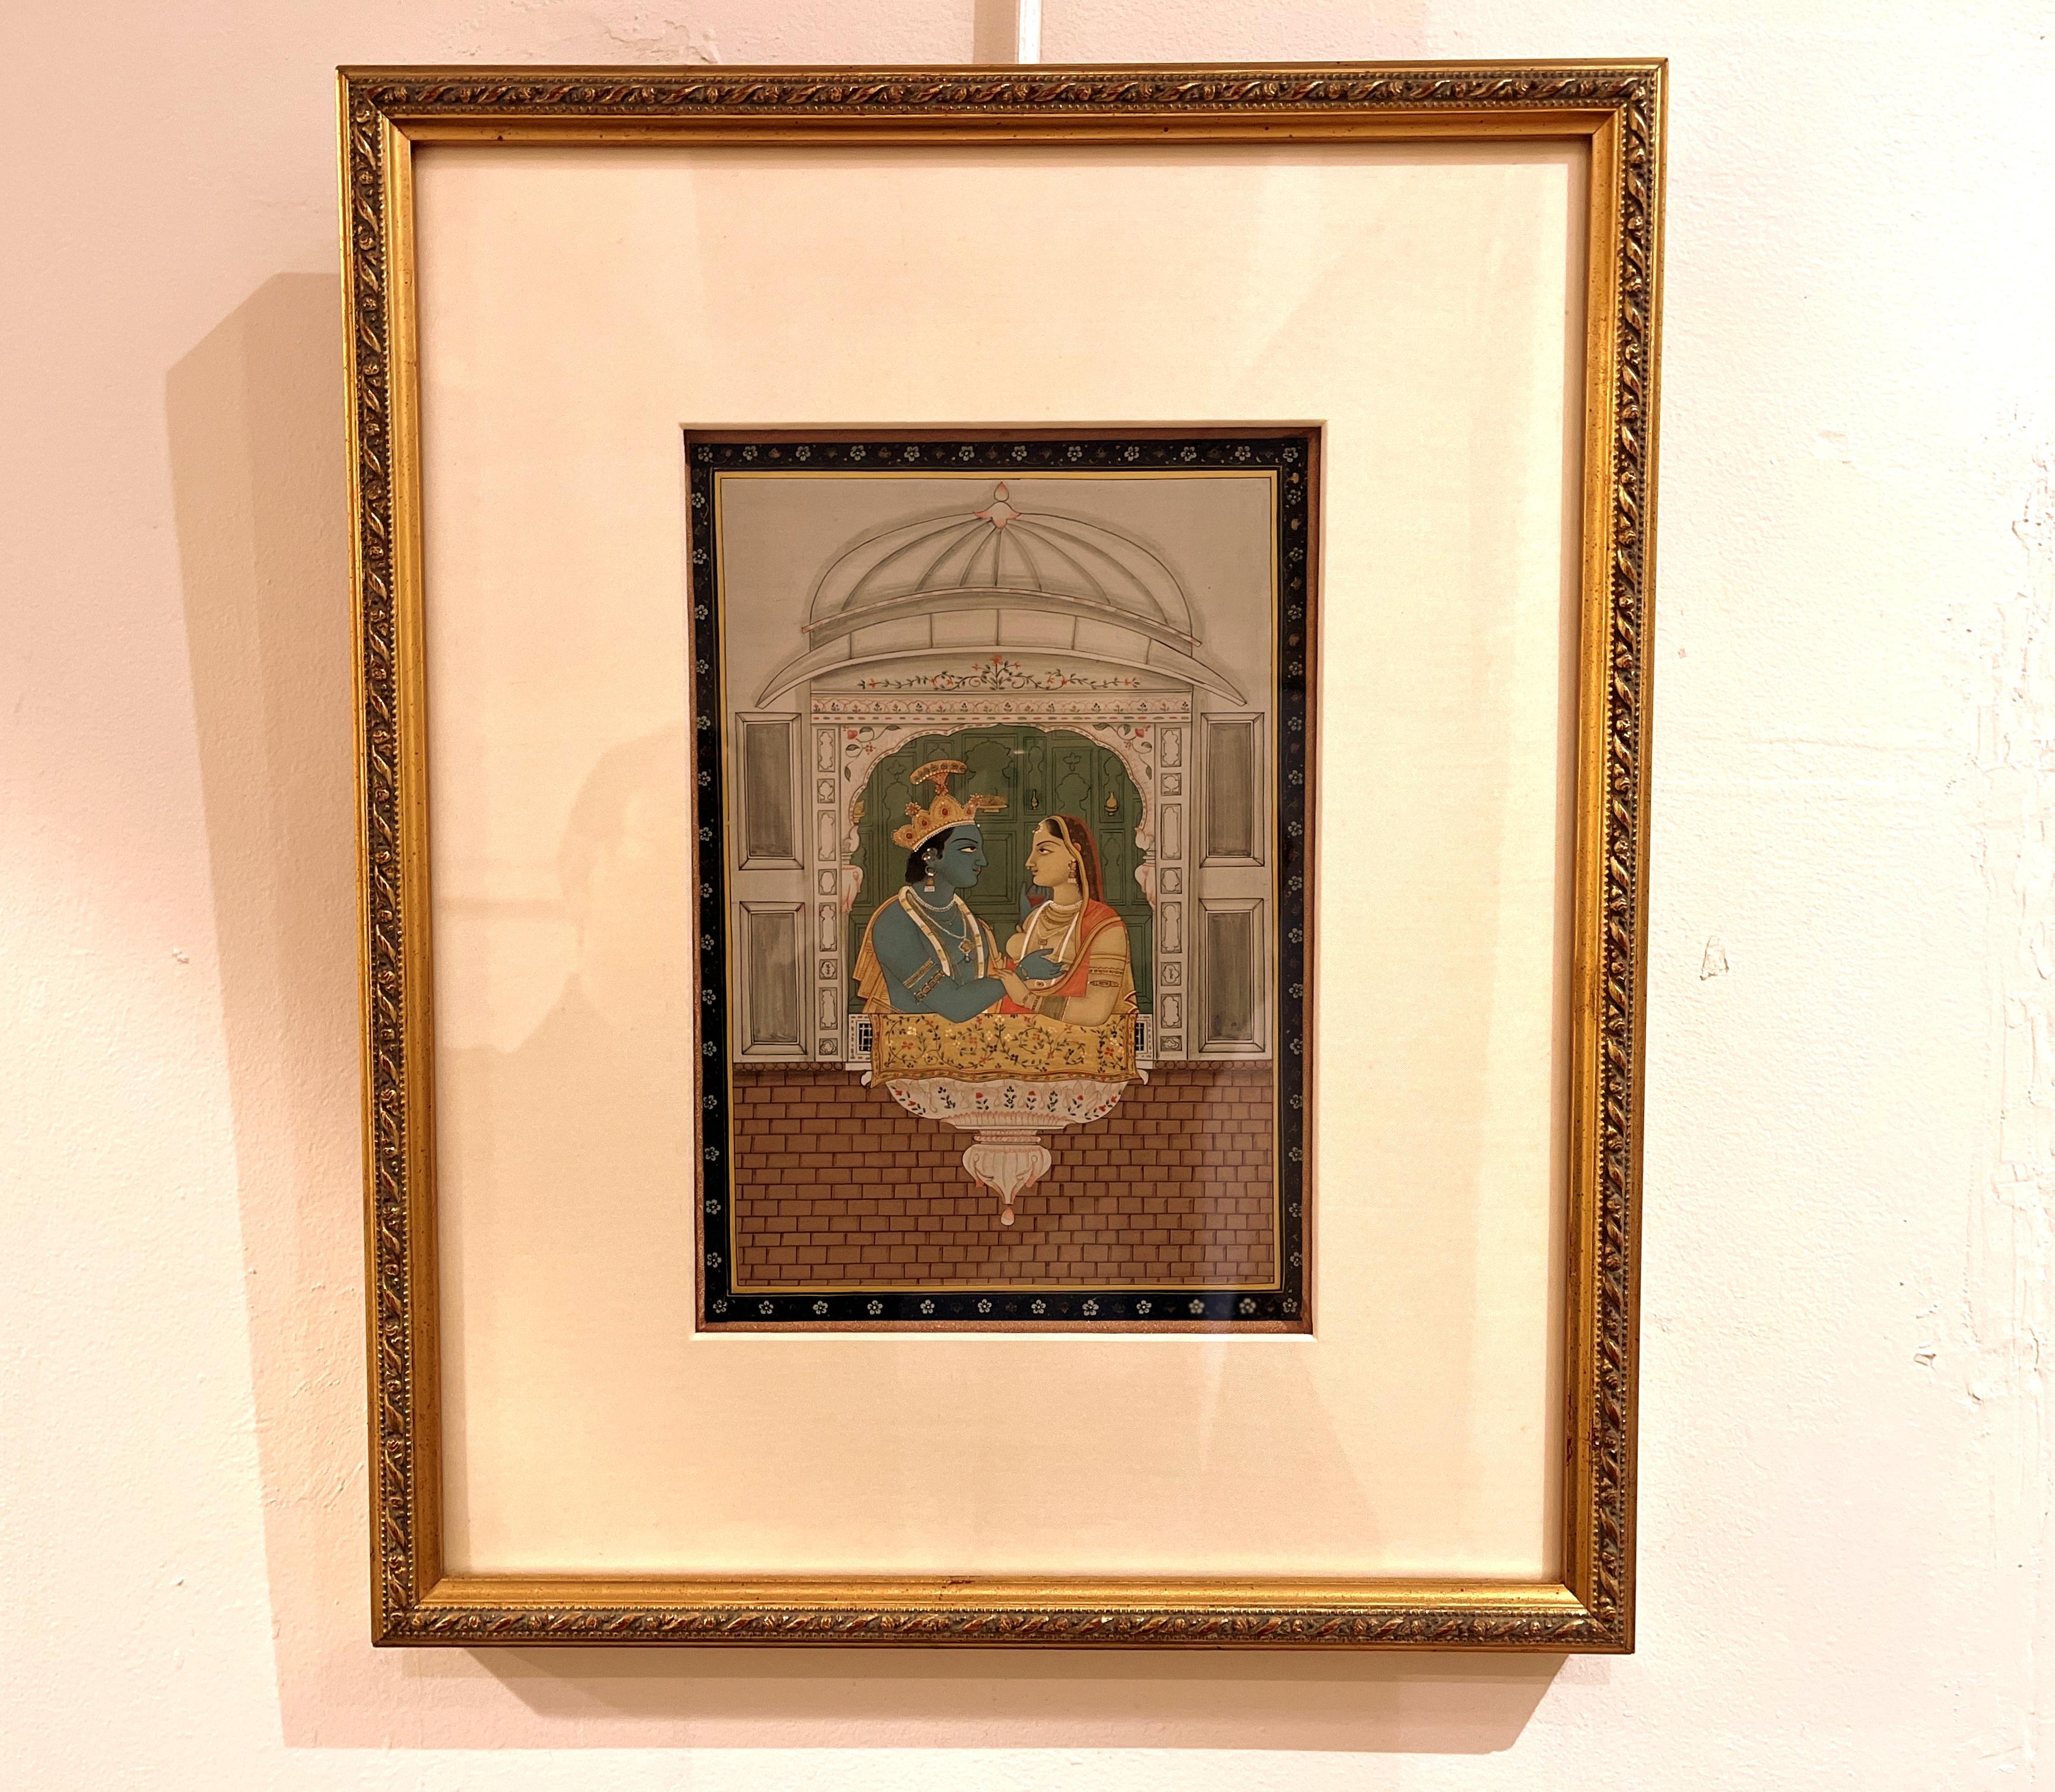 Framed refined Indian court painting, beautiful colors and gold leafing, exquisite details, 19th century,  Conservation framed
Overall size with frame:  14